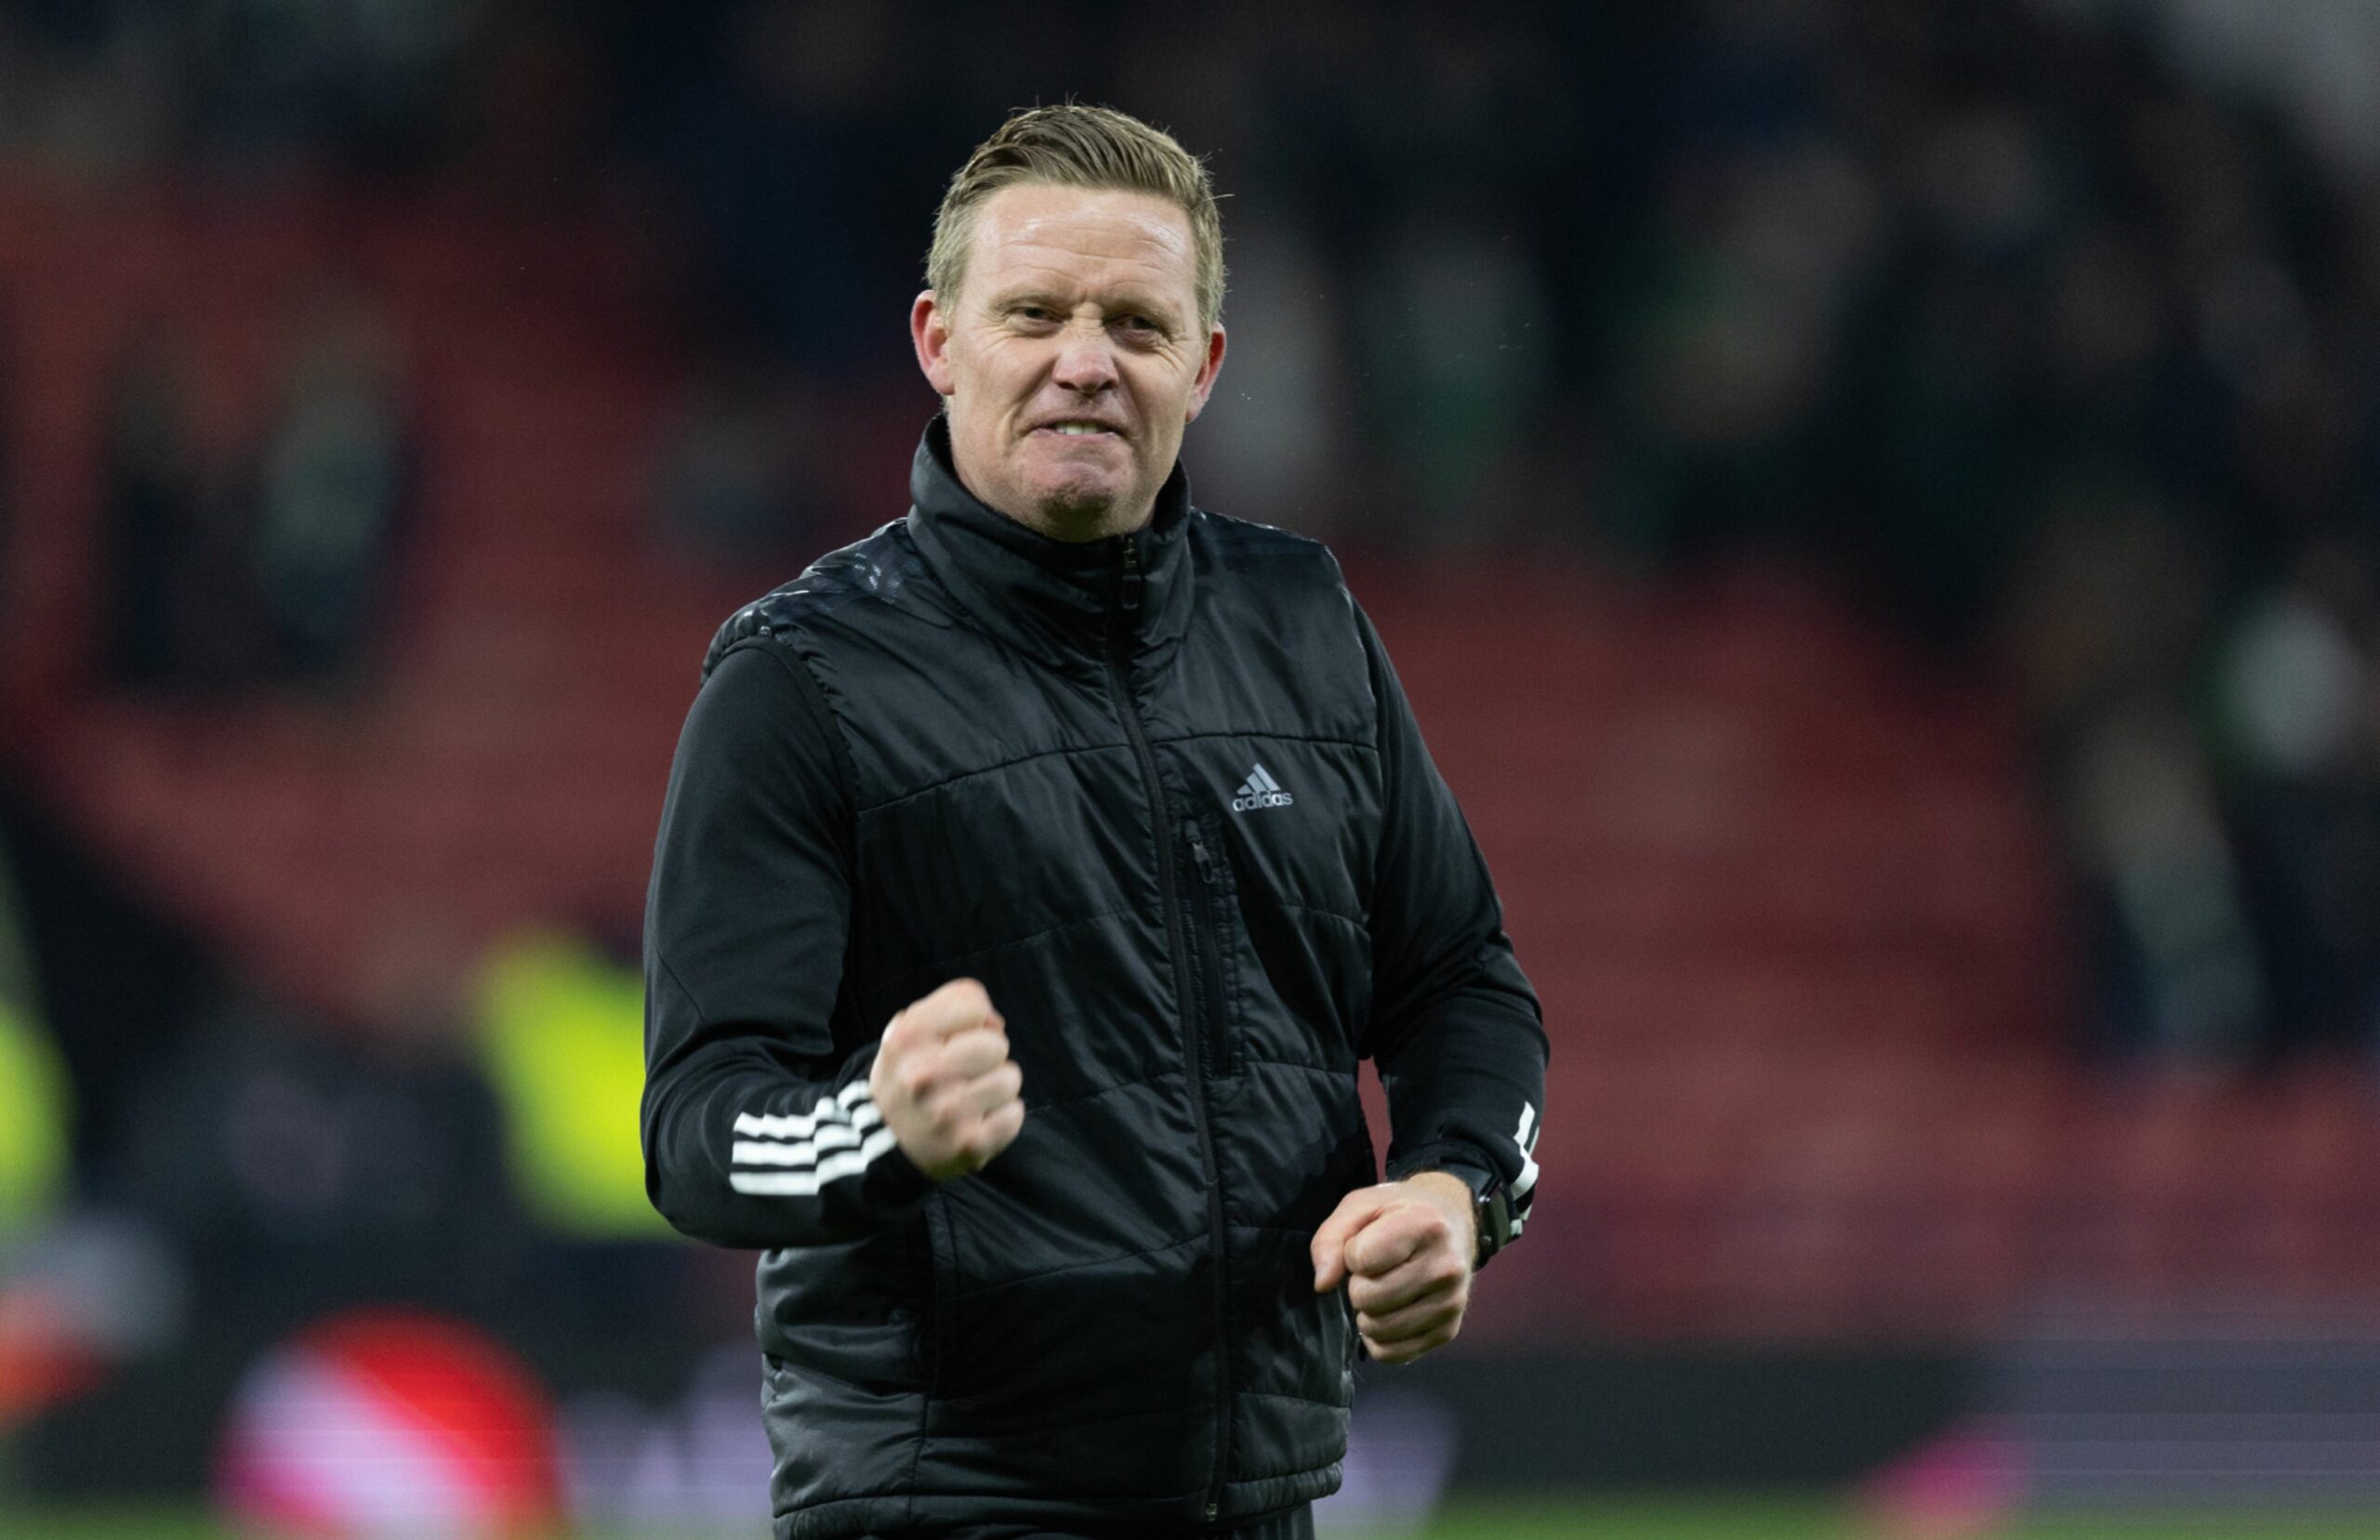 Aberdeen manager Barry Robson celebrating with his hands in fists